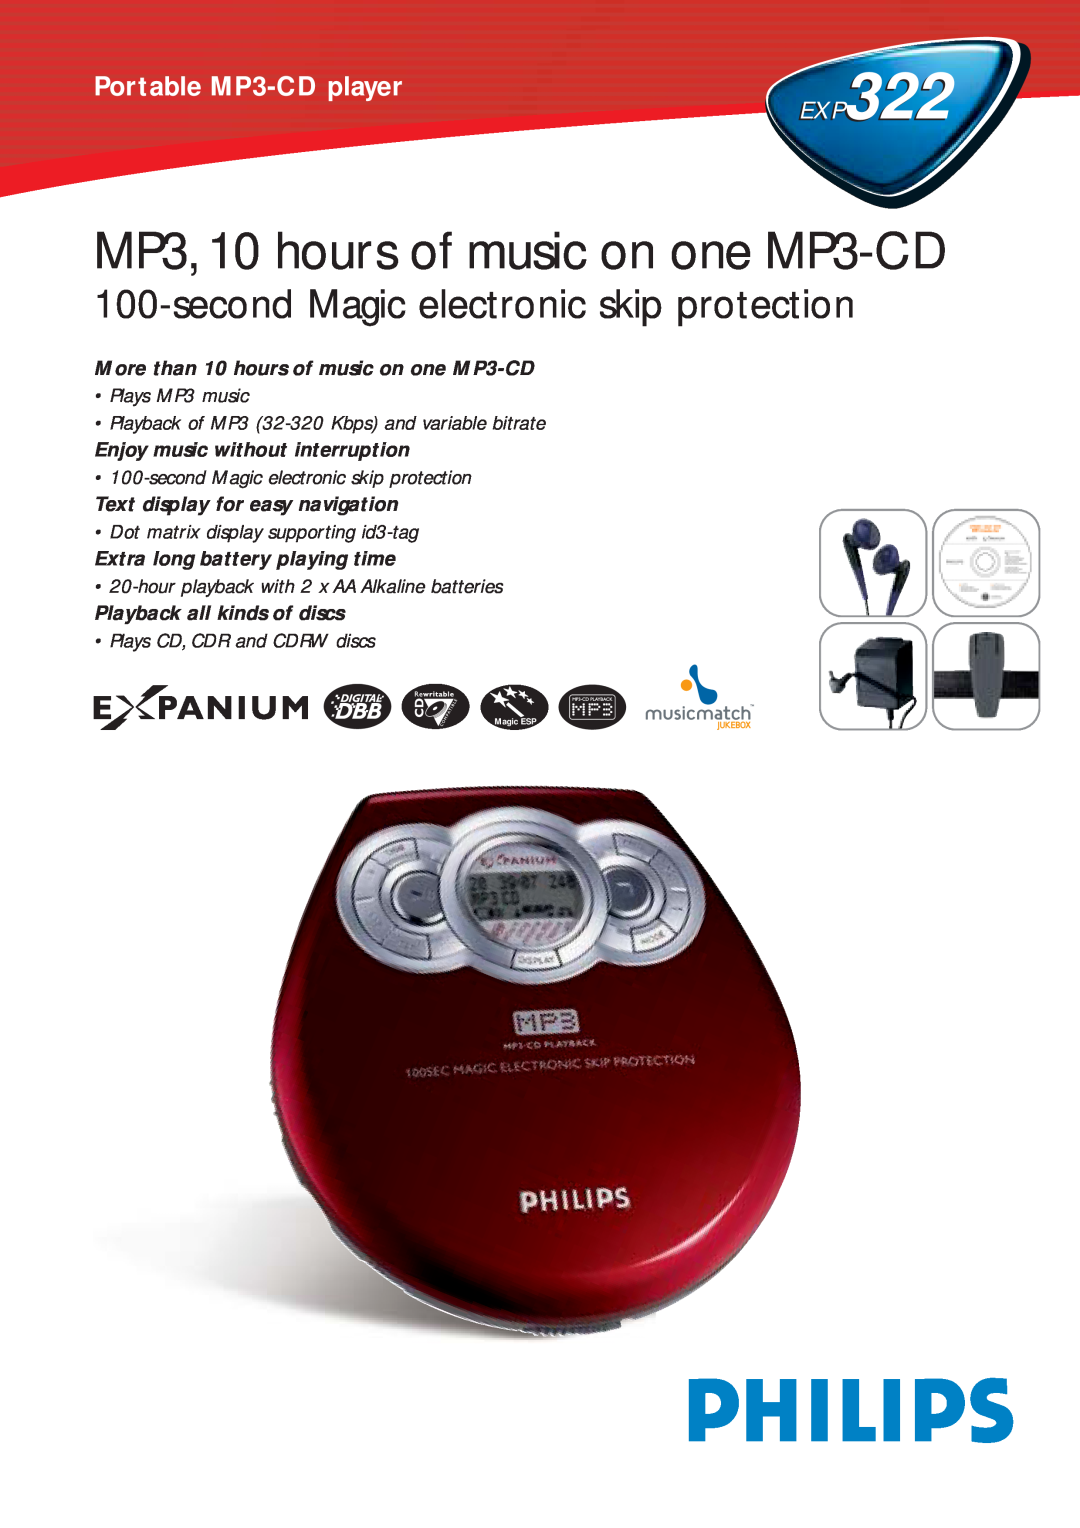 Philips EXP322 manual MP3, 10 hours of music on one MP3-CD, second Magic electronic skip protection 